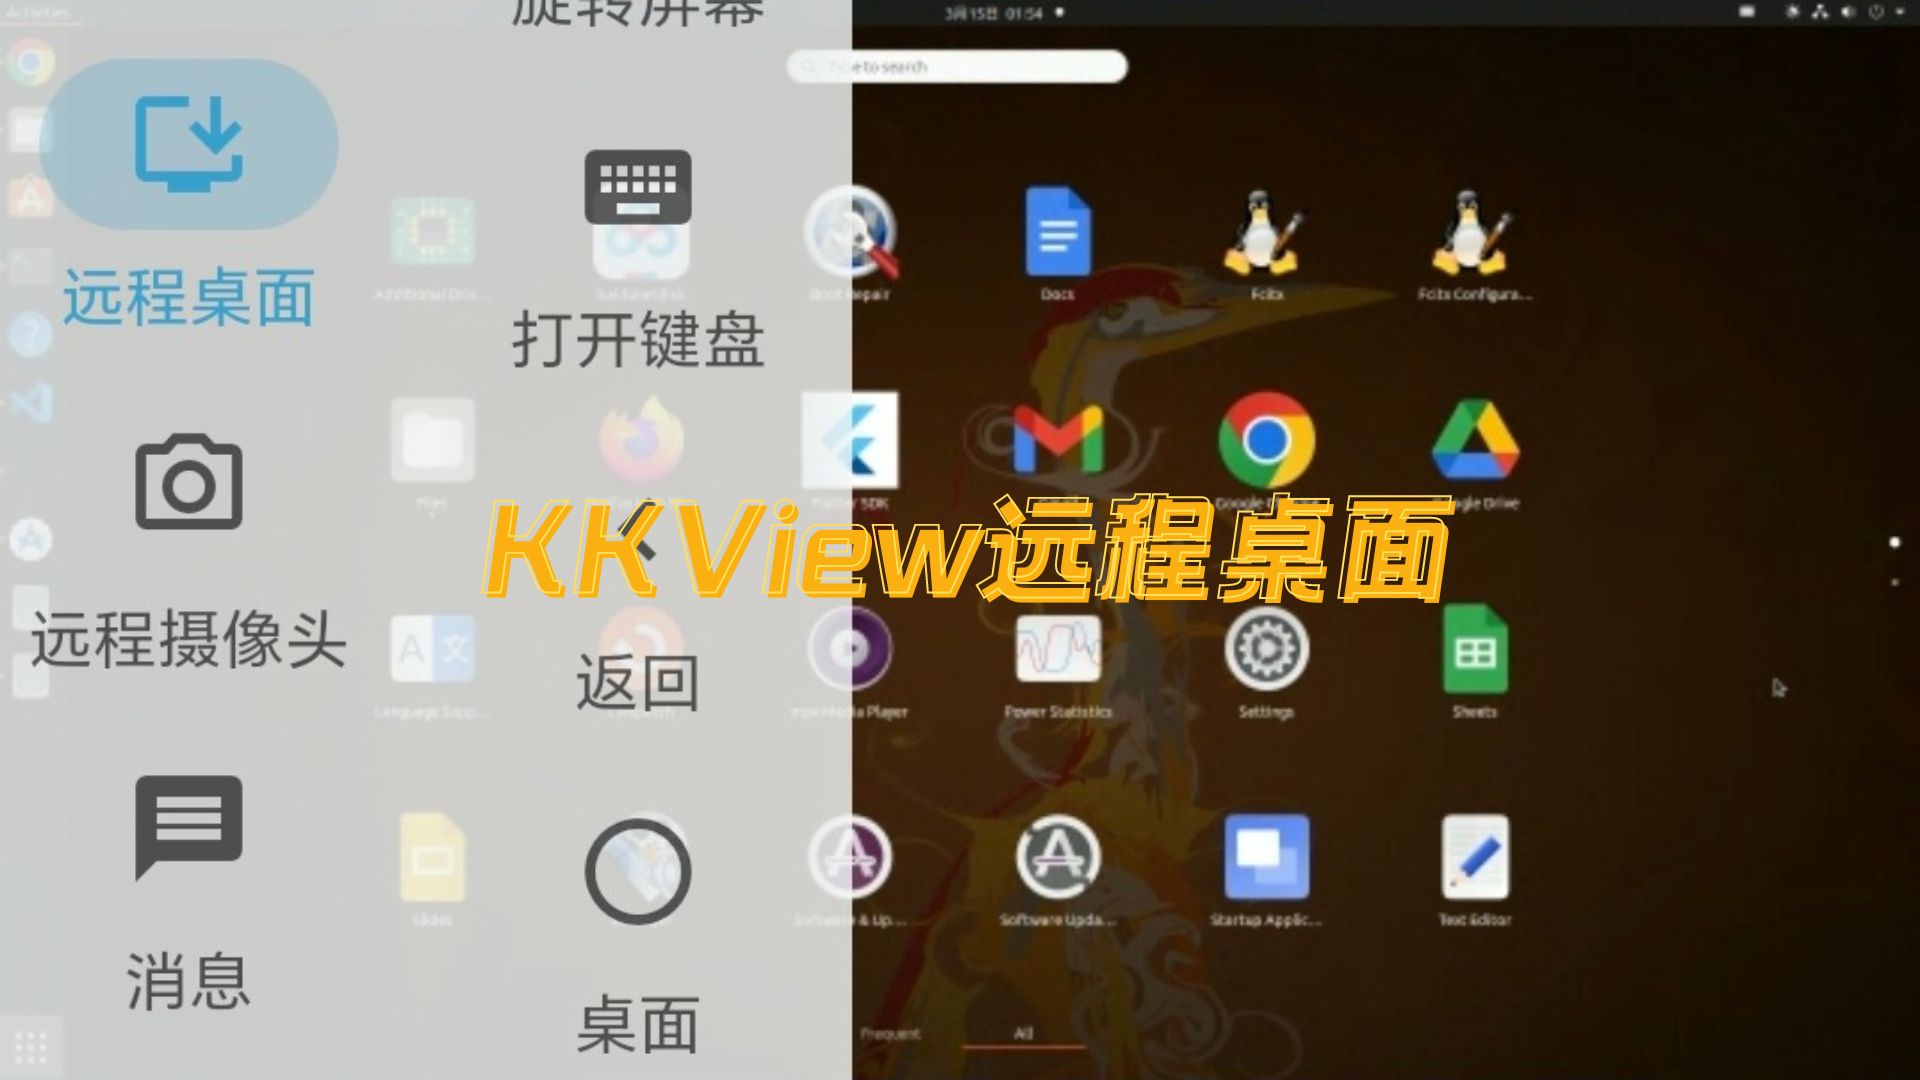 KKVIEW远程<span style='color:red;'>控制</span> <span style='color:red;'>手机</span>远程<span style='color:red;'>控制</span><span style='color:red;'>电脑</span>